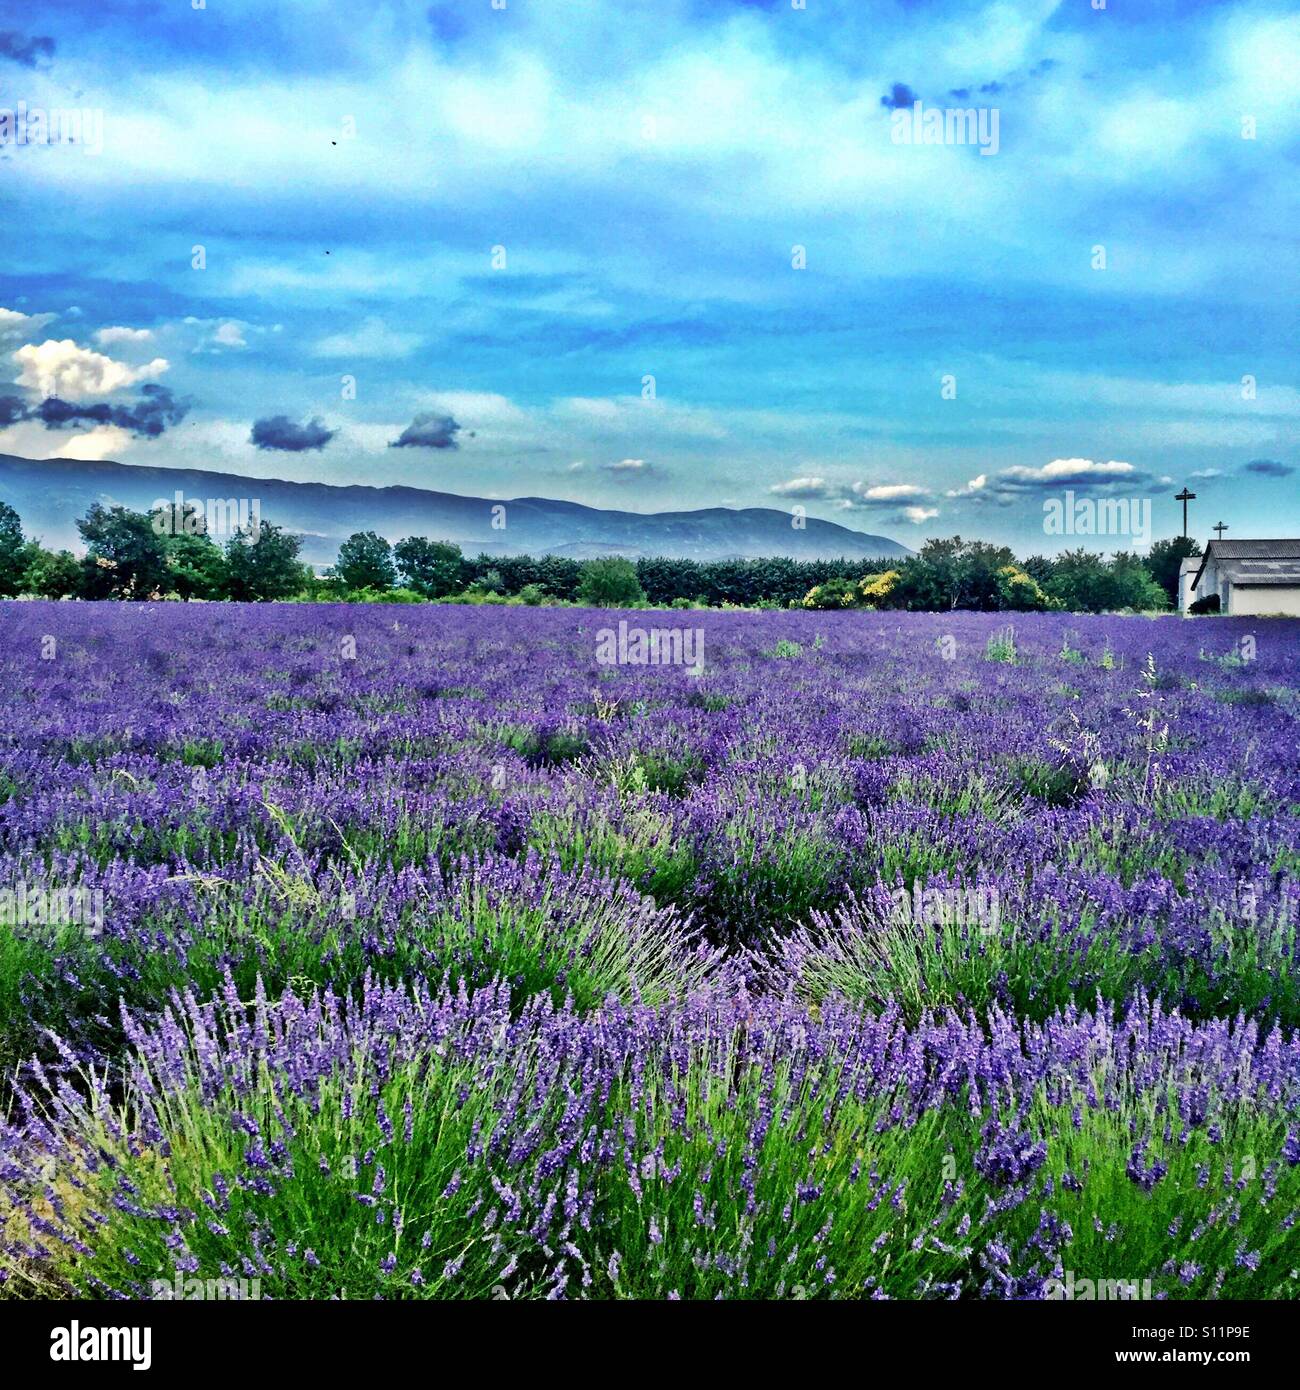 Lavender fields with house at background in Provence, France, plateau de valensole Stock Photo